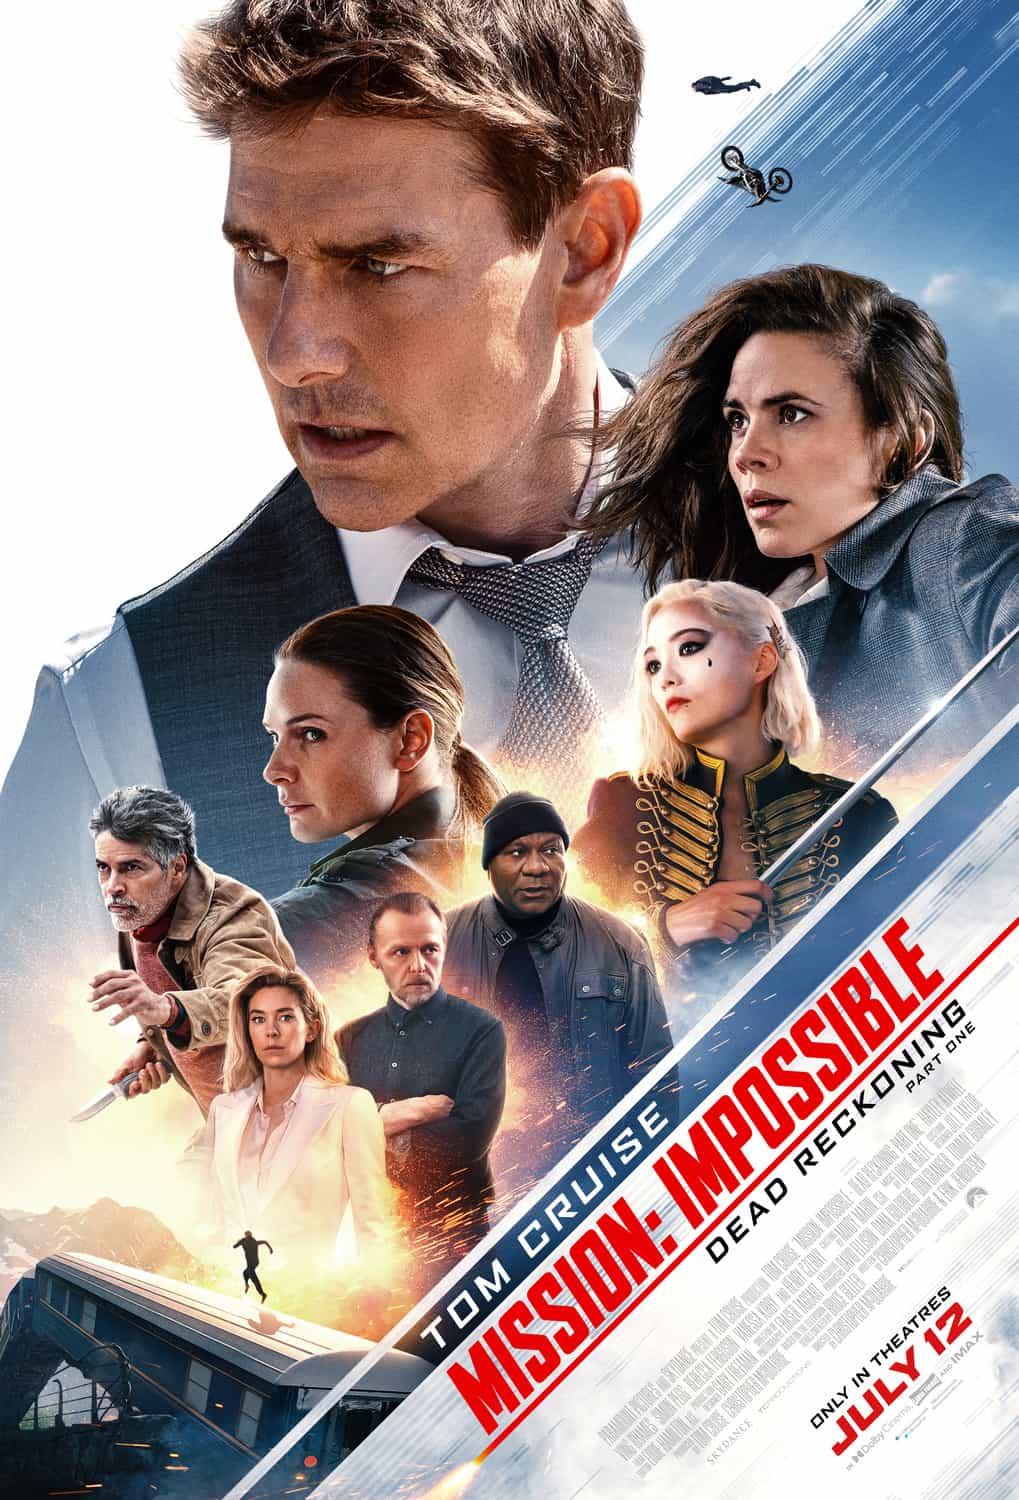 Global Box Office Weekend Report 14th - 16th July 2023:  Mission:Impossible 7 tops the global box office on its debut with over $235 Million